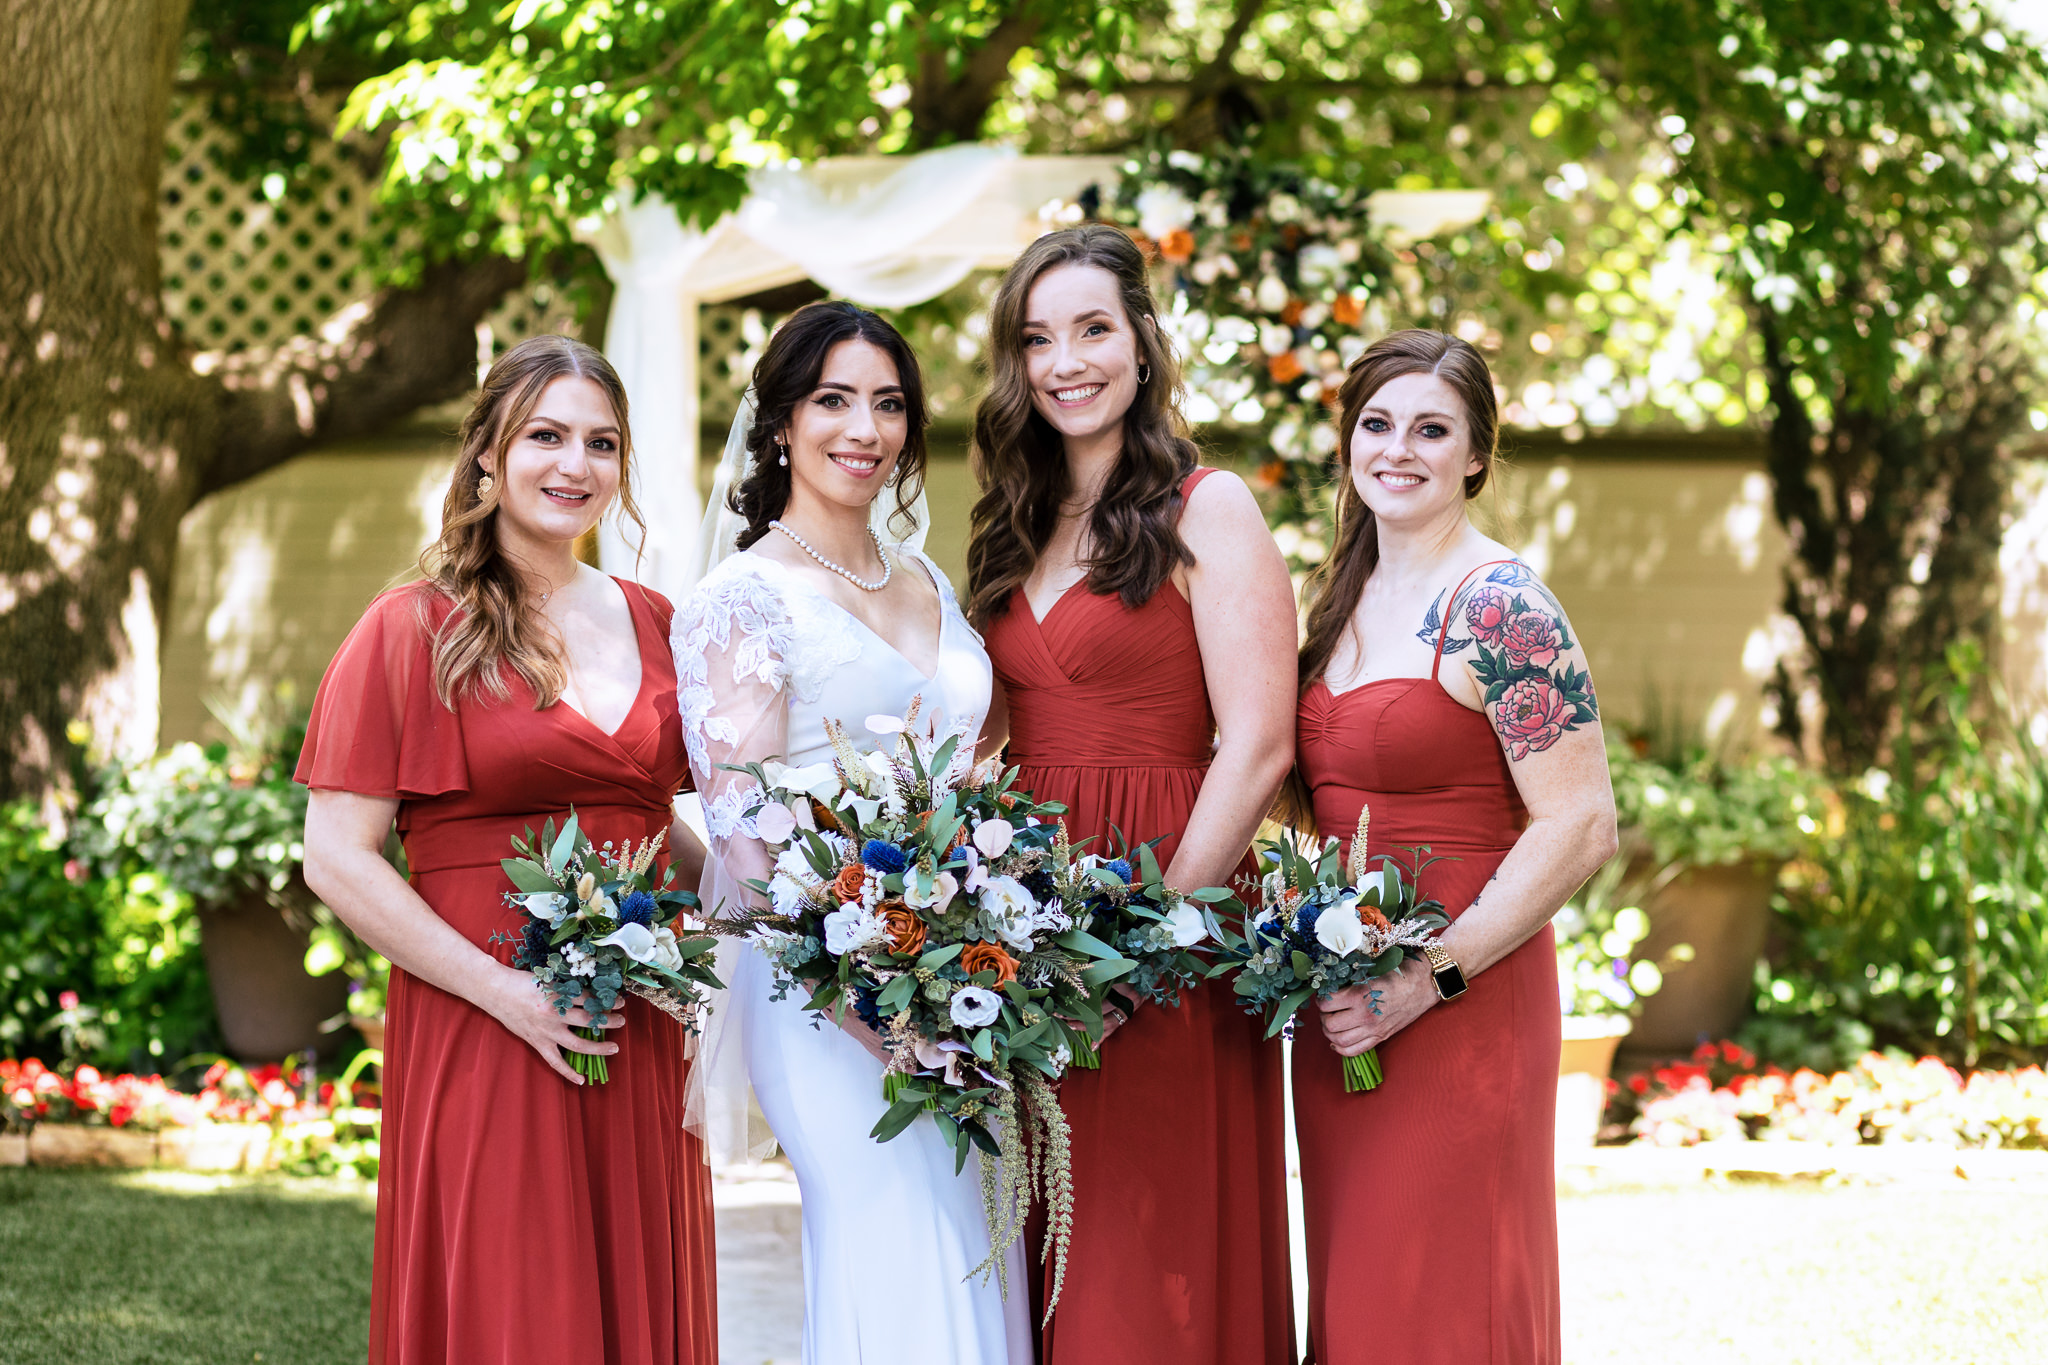 Photo of the Bride with her Bridesmaids out on the lawn for Haley & Gytenis' Summer Wedding at The McCreery House by Colorado Wedding Photographer, Jennifer Garza.